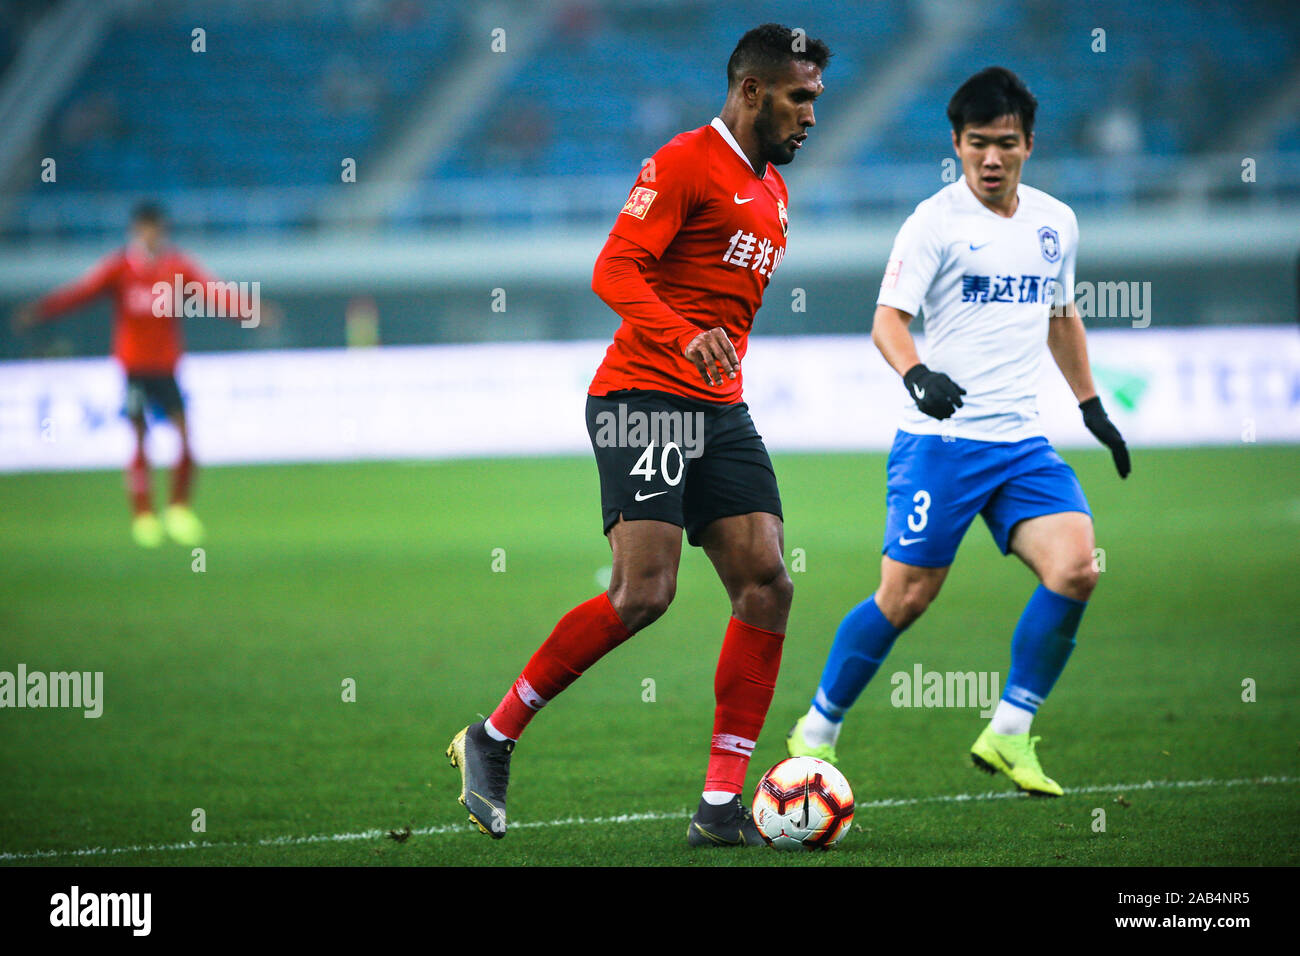 Brazilian-born Portuguese football player Dyego Sousa of Shenzhen F.C., left, keeps the ball during the 28th round match of Chinese Football Association Super League (CSL) against Tianjin TEDA in Tianjin, China, 23 November 2019. Tianjin TEDA slashed Shenzhen F.C. with 3-0. Stock Photo